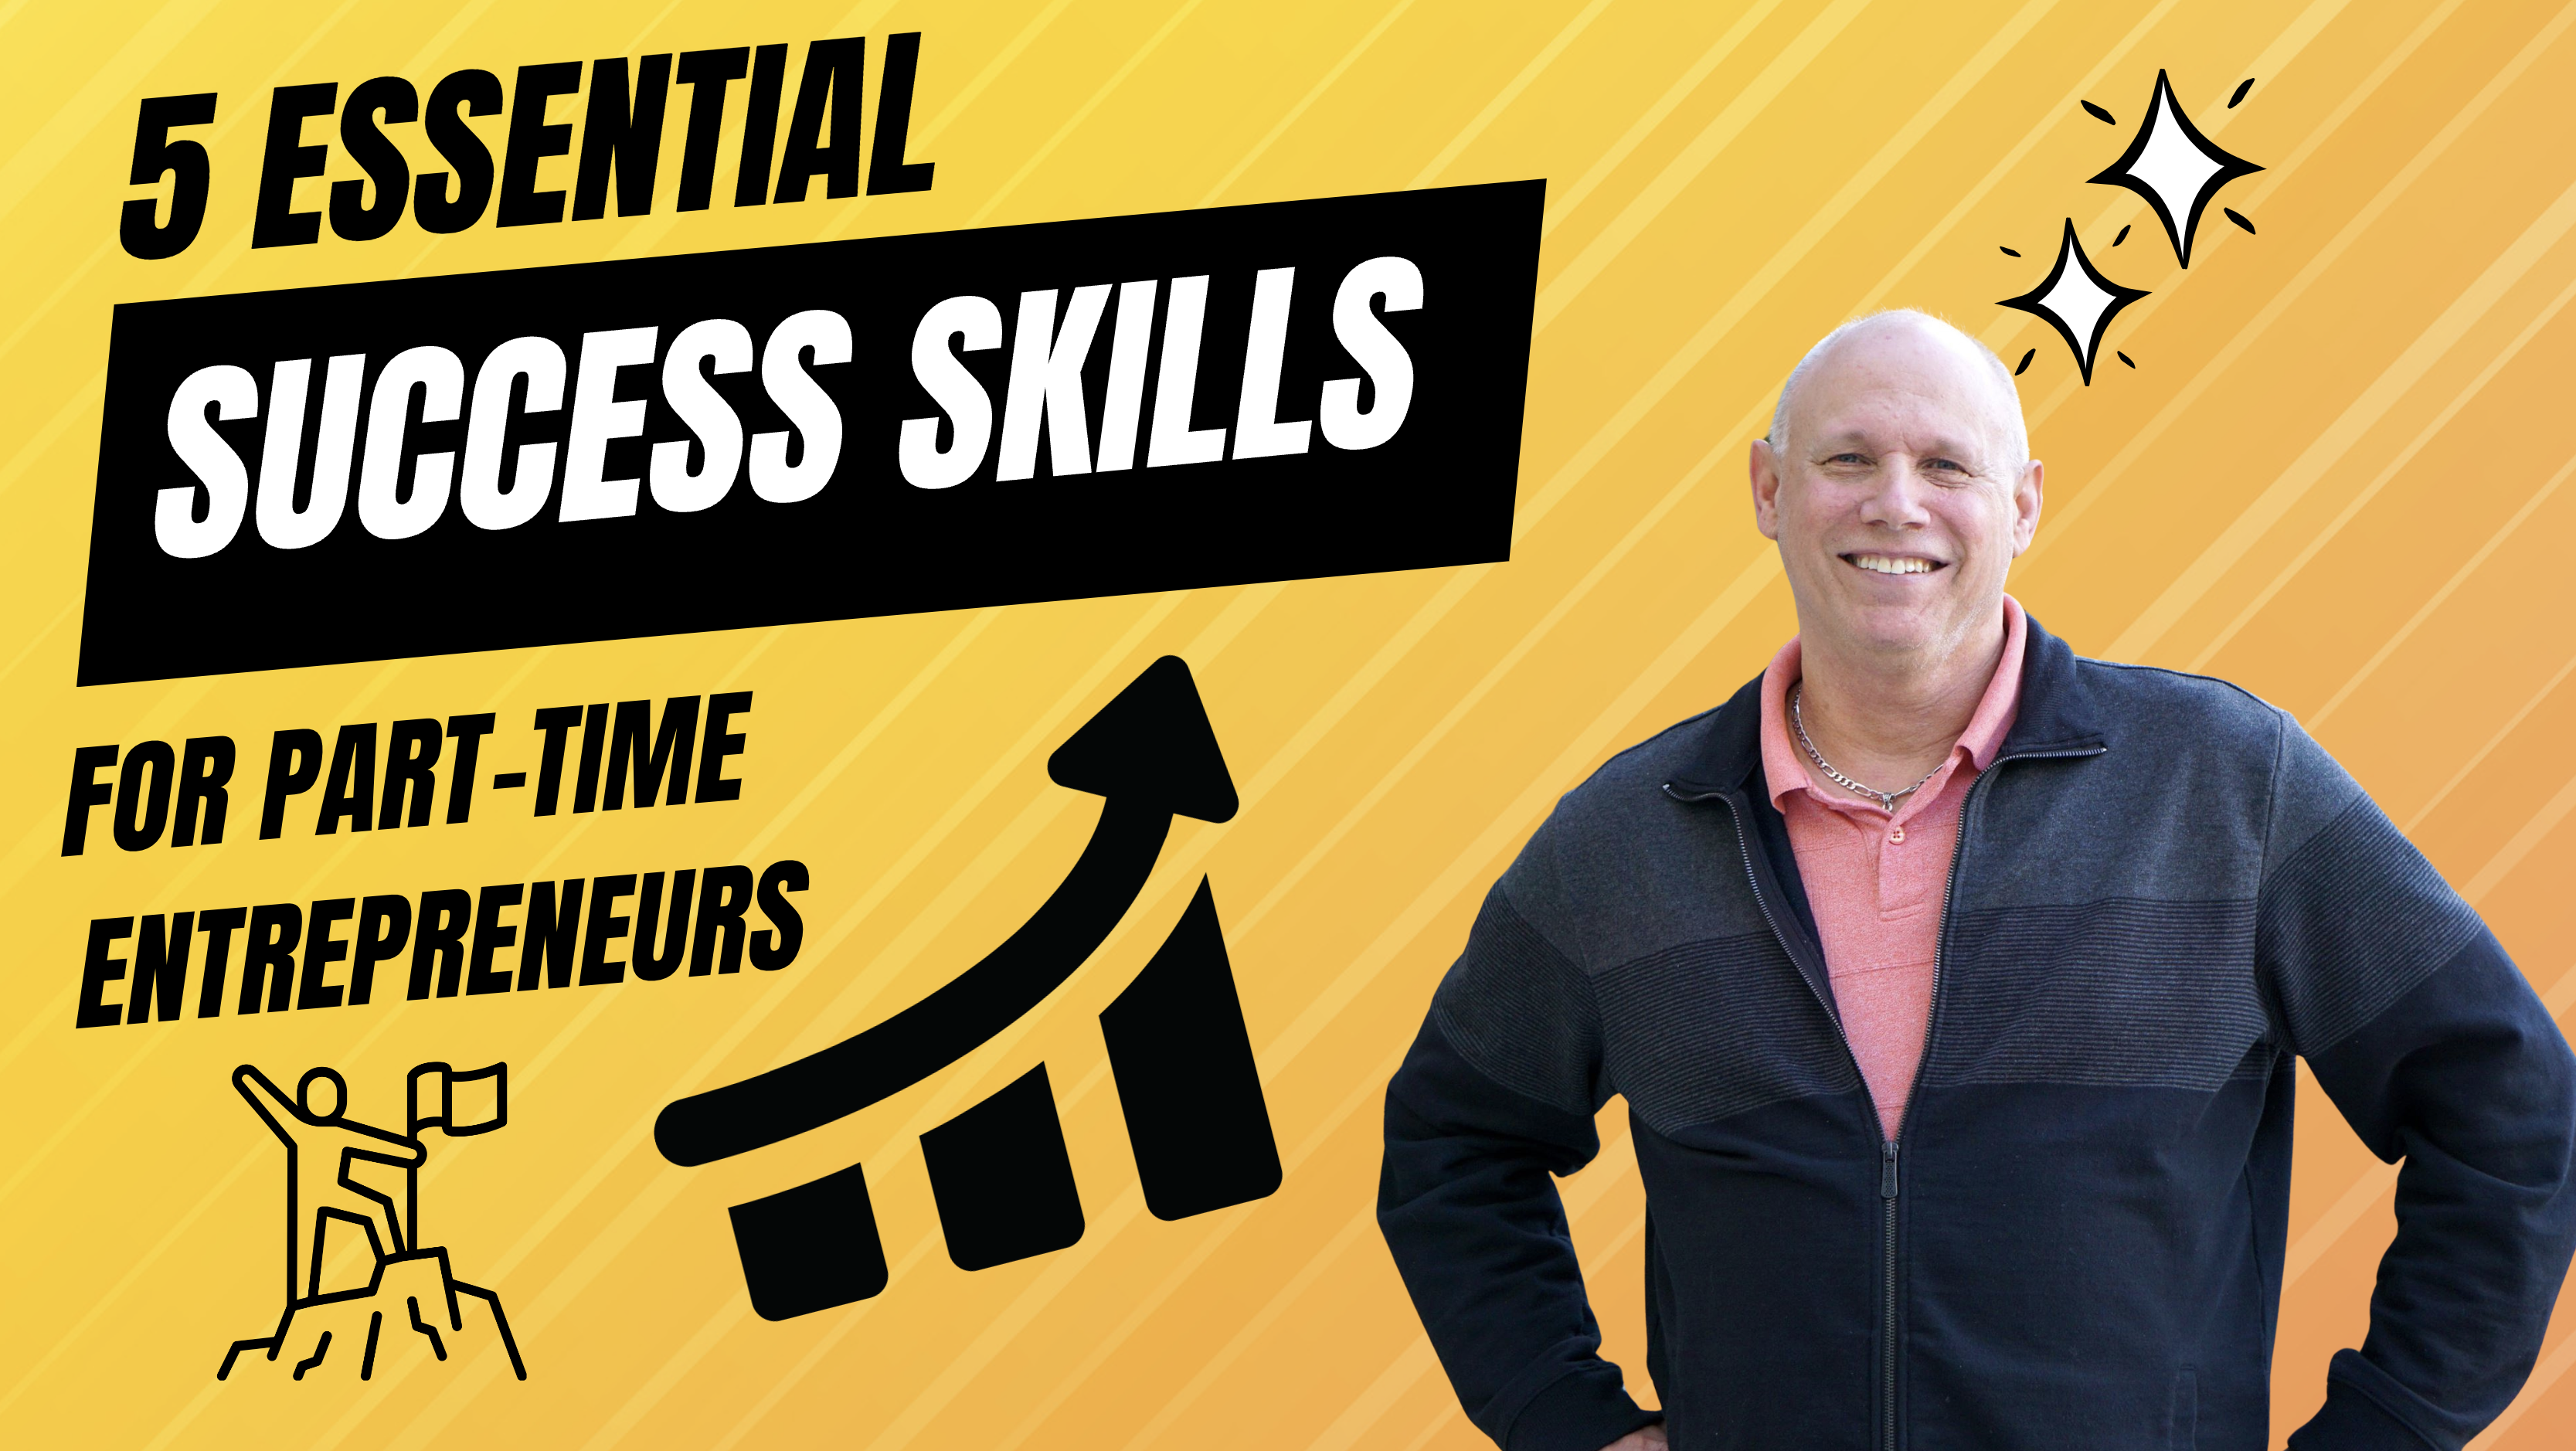 The 5 Essential Success Skills Every Part-Time Entrepreneur Needs